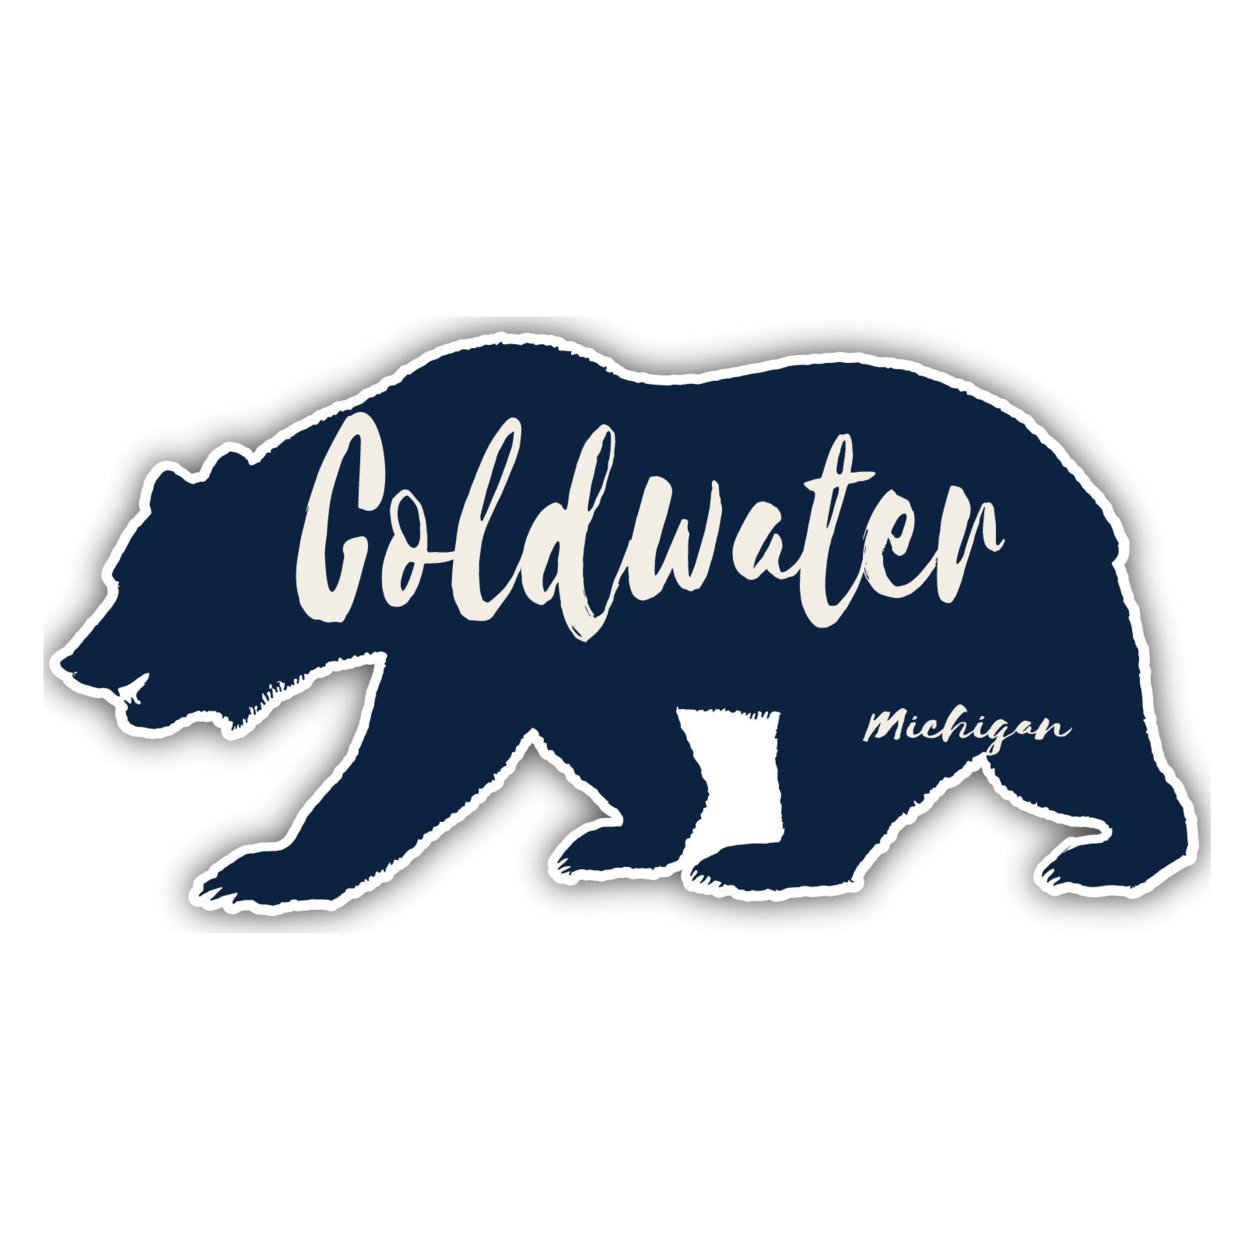 Coldwater Michigan Souvenir Decorative Stickers (Choose Theme And Size) - 4-Pack, 6-Inch, Bear